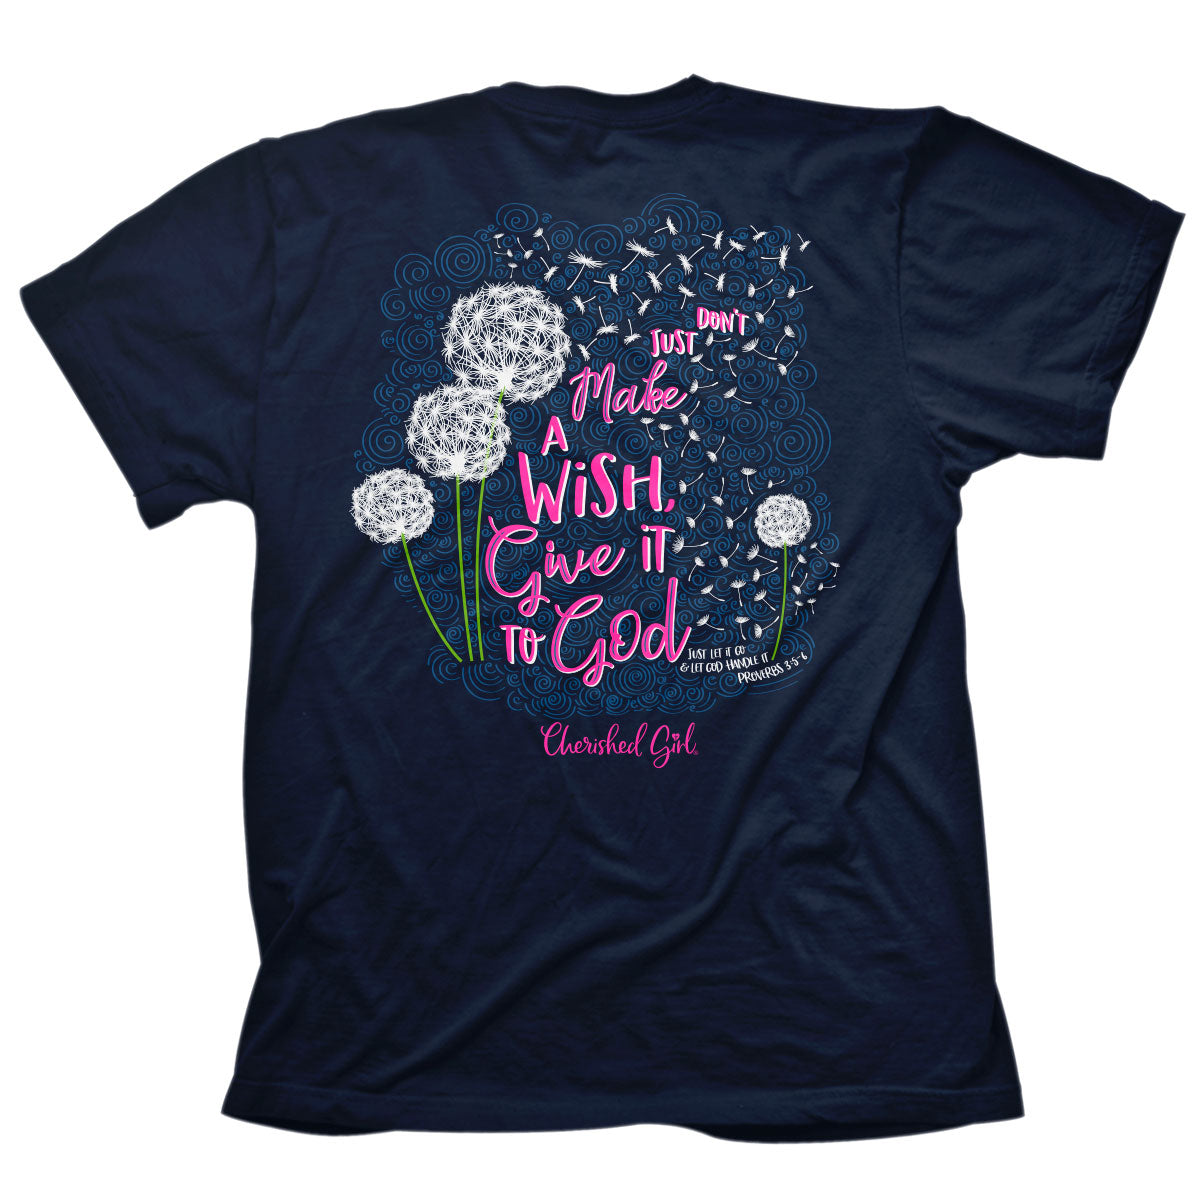 Cross Your Heart Ladies' Triblend T-Shirt • Unique Gift Shopping